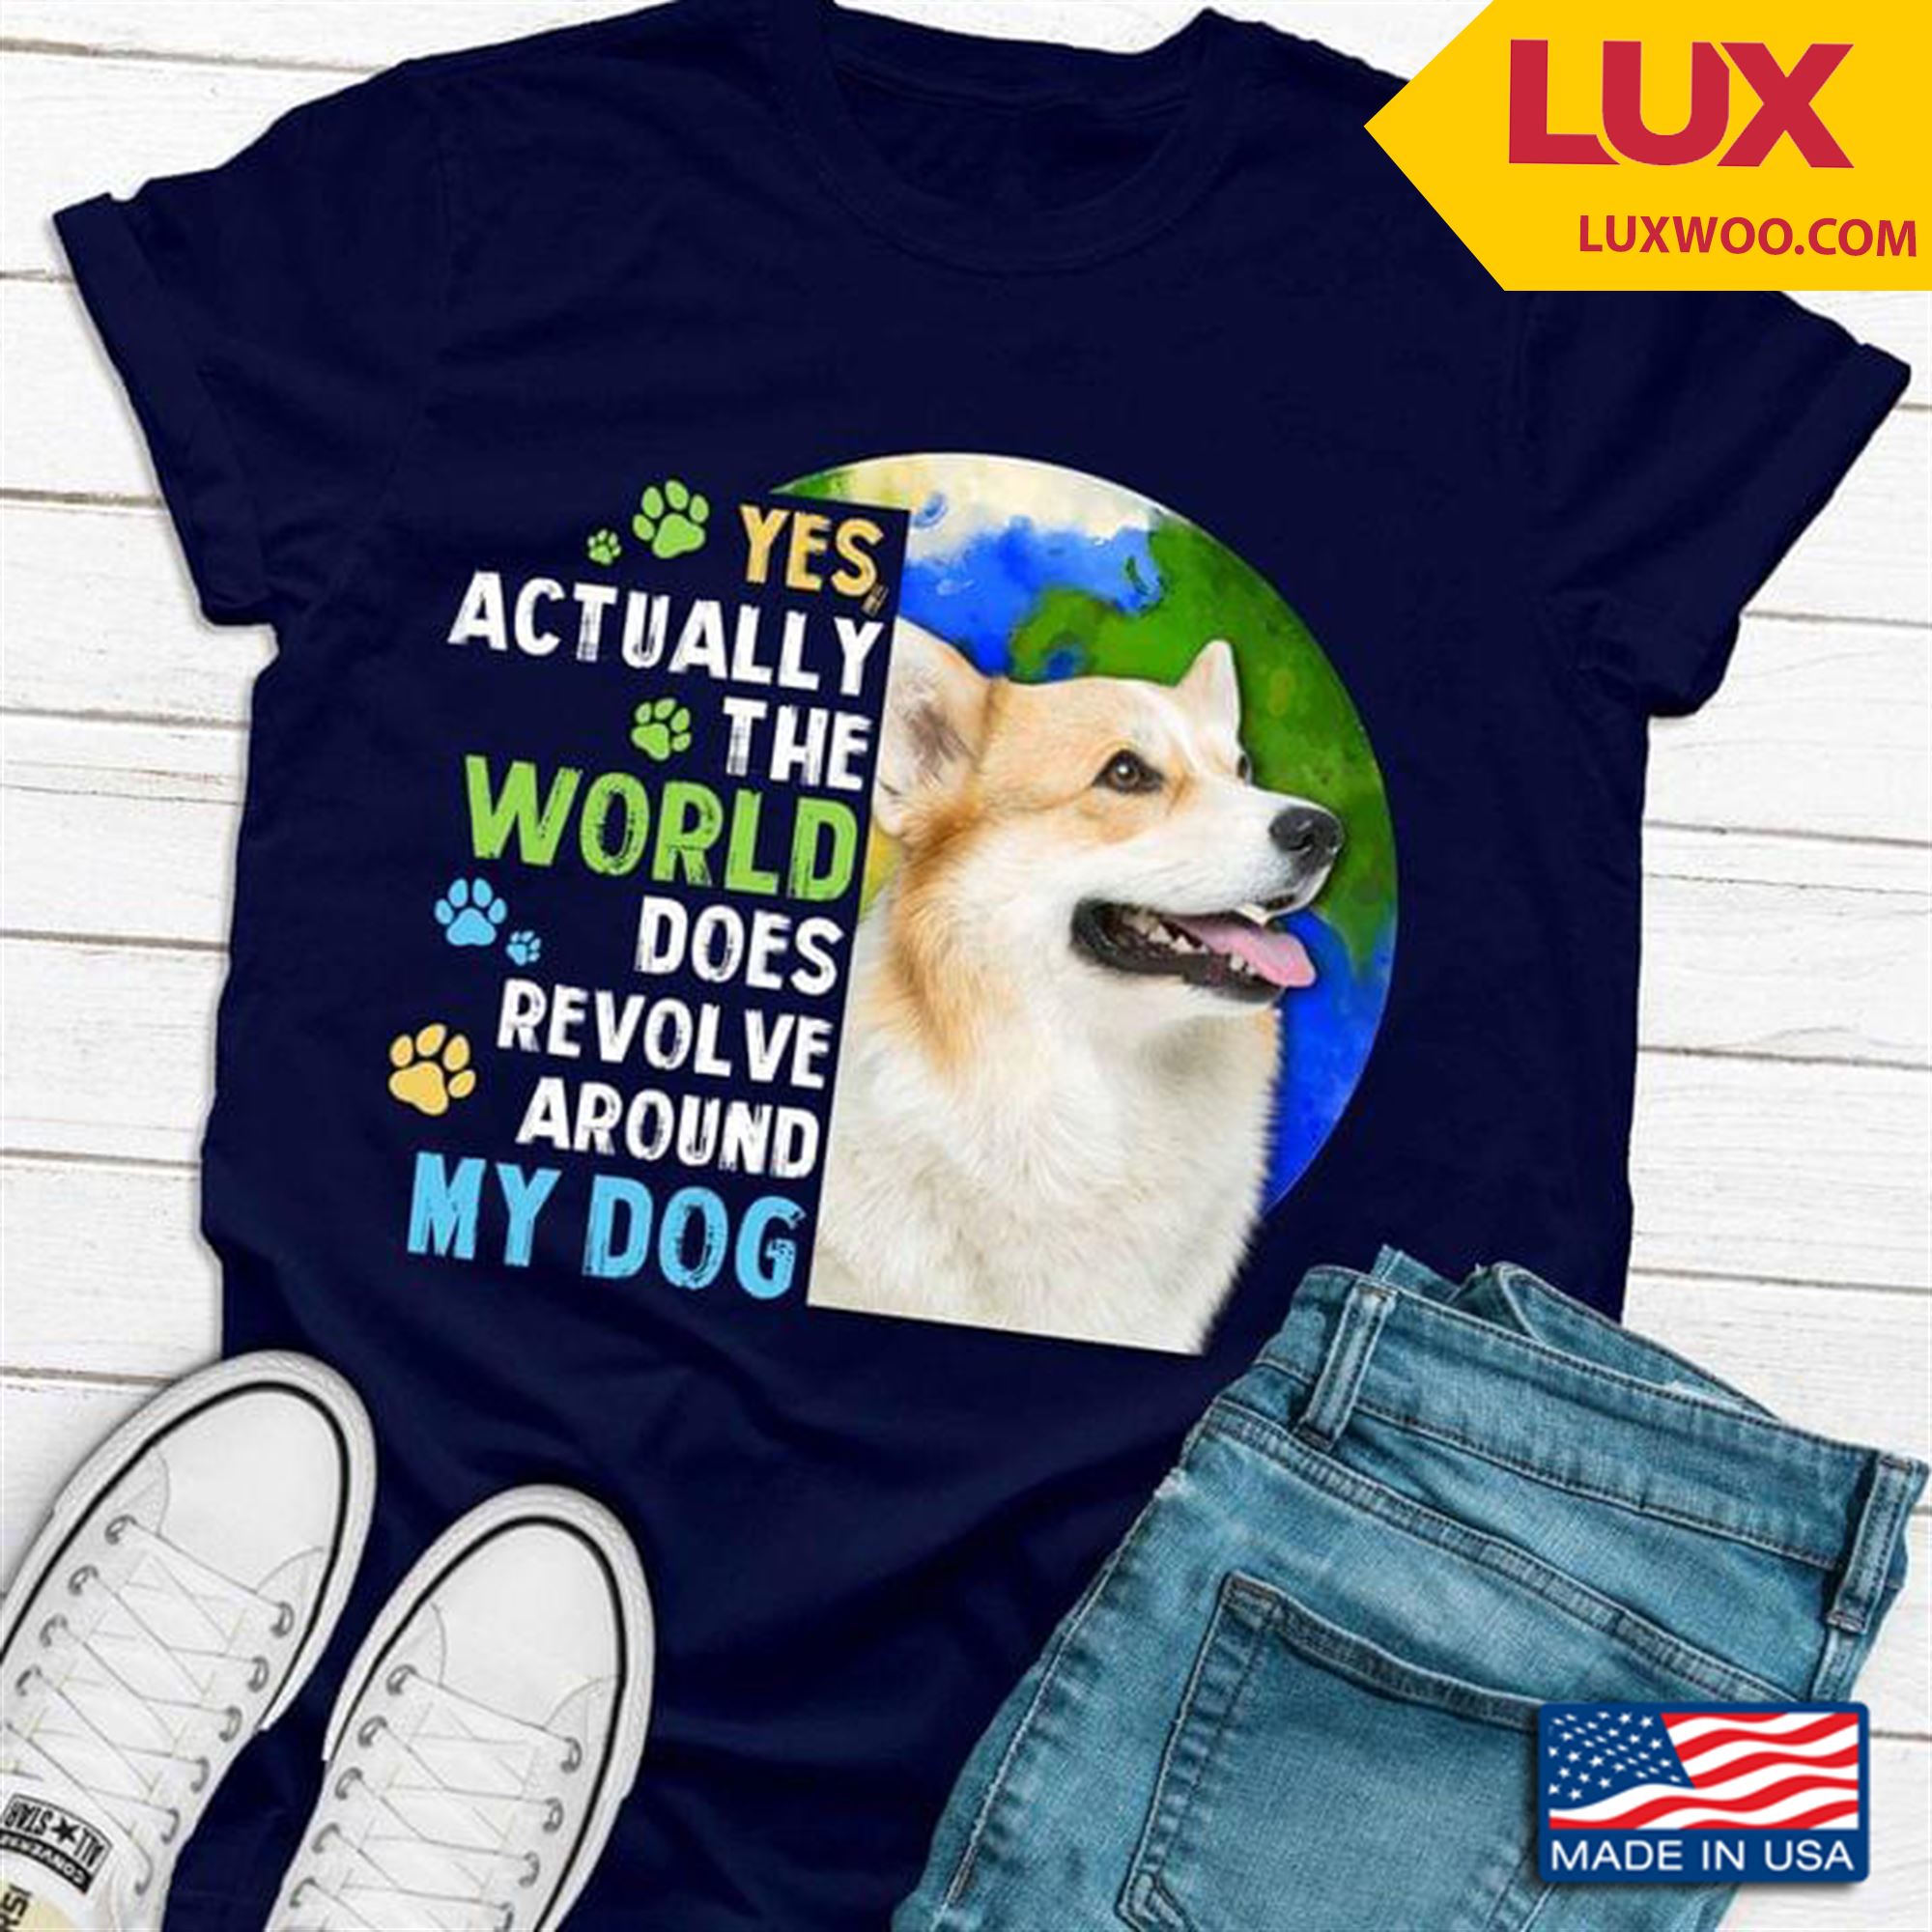 Corgi Yes Actually The World Does Revolve Around My Dog Tshirt Plus Size Up To 5xl